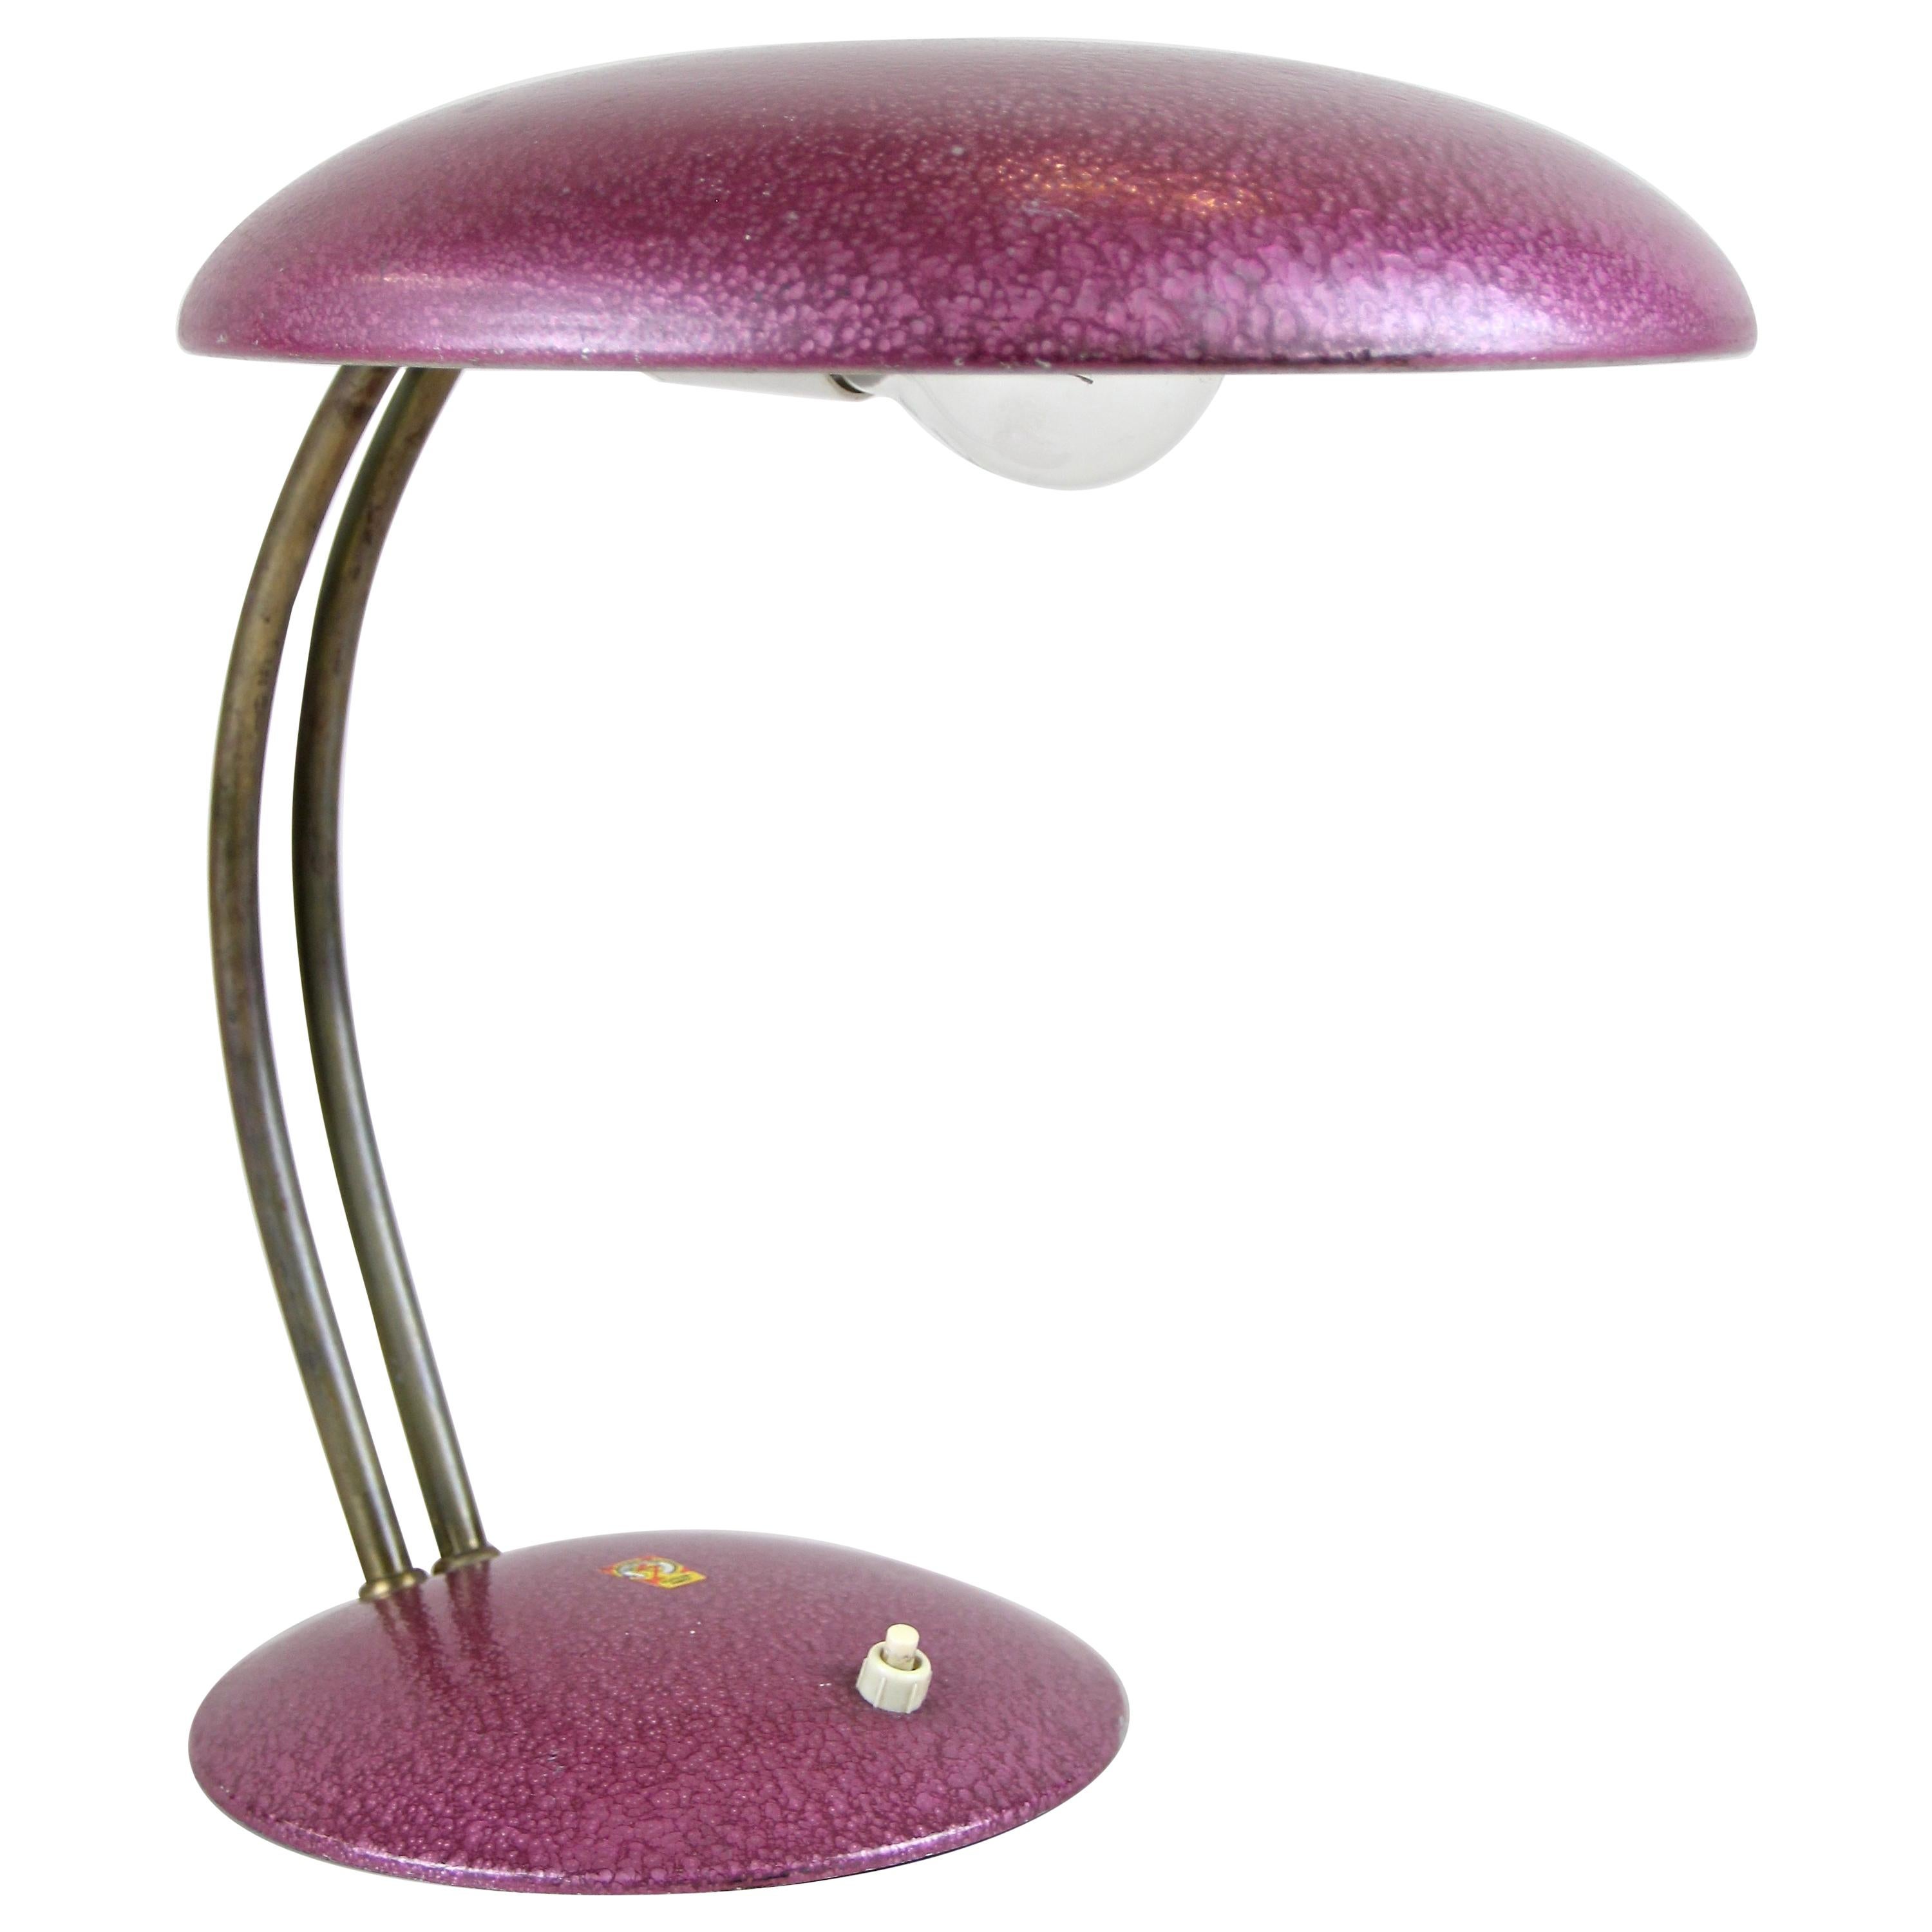 Fantastic mid century table lamp out of the period in Austria around 1960/70. A small mid 20th century table lamp with a timeless design that could have been made by a contemporary artist from the 21th century. Finished with a fantastic looking